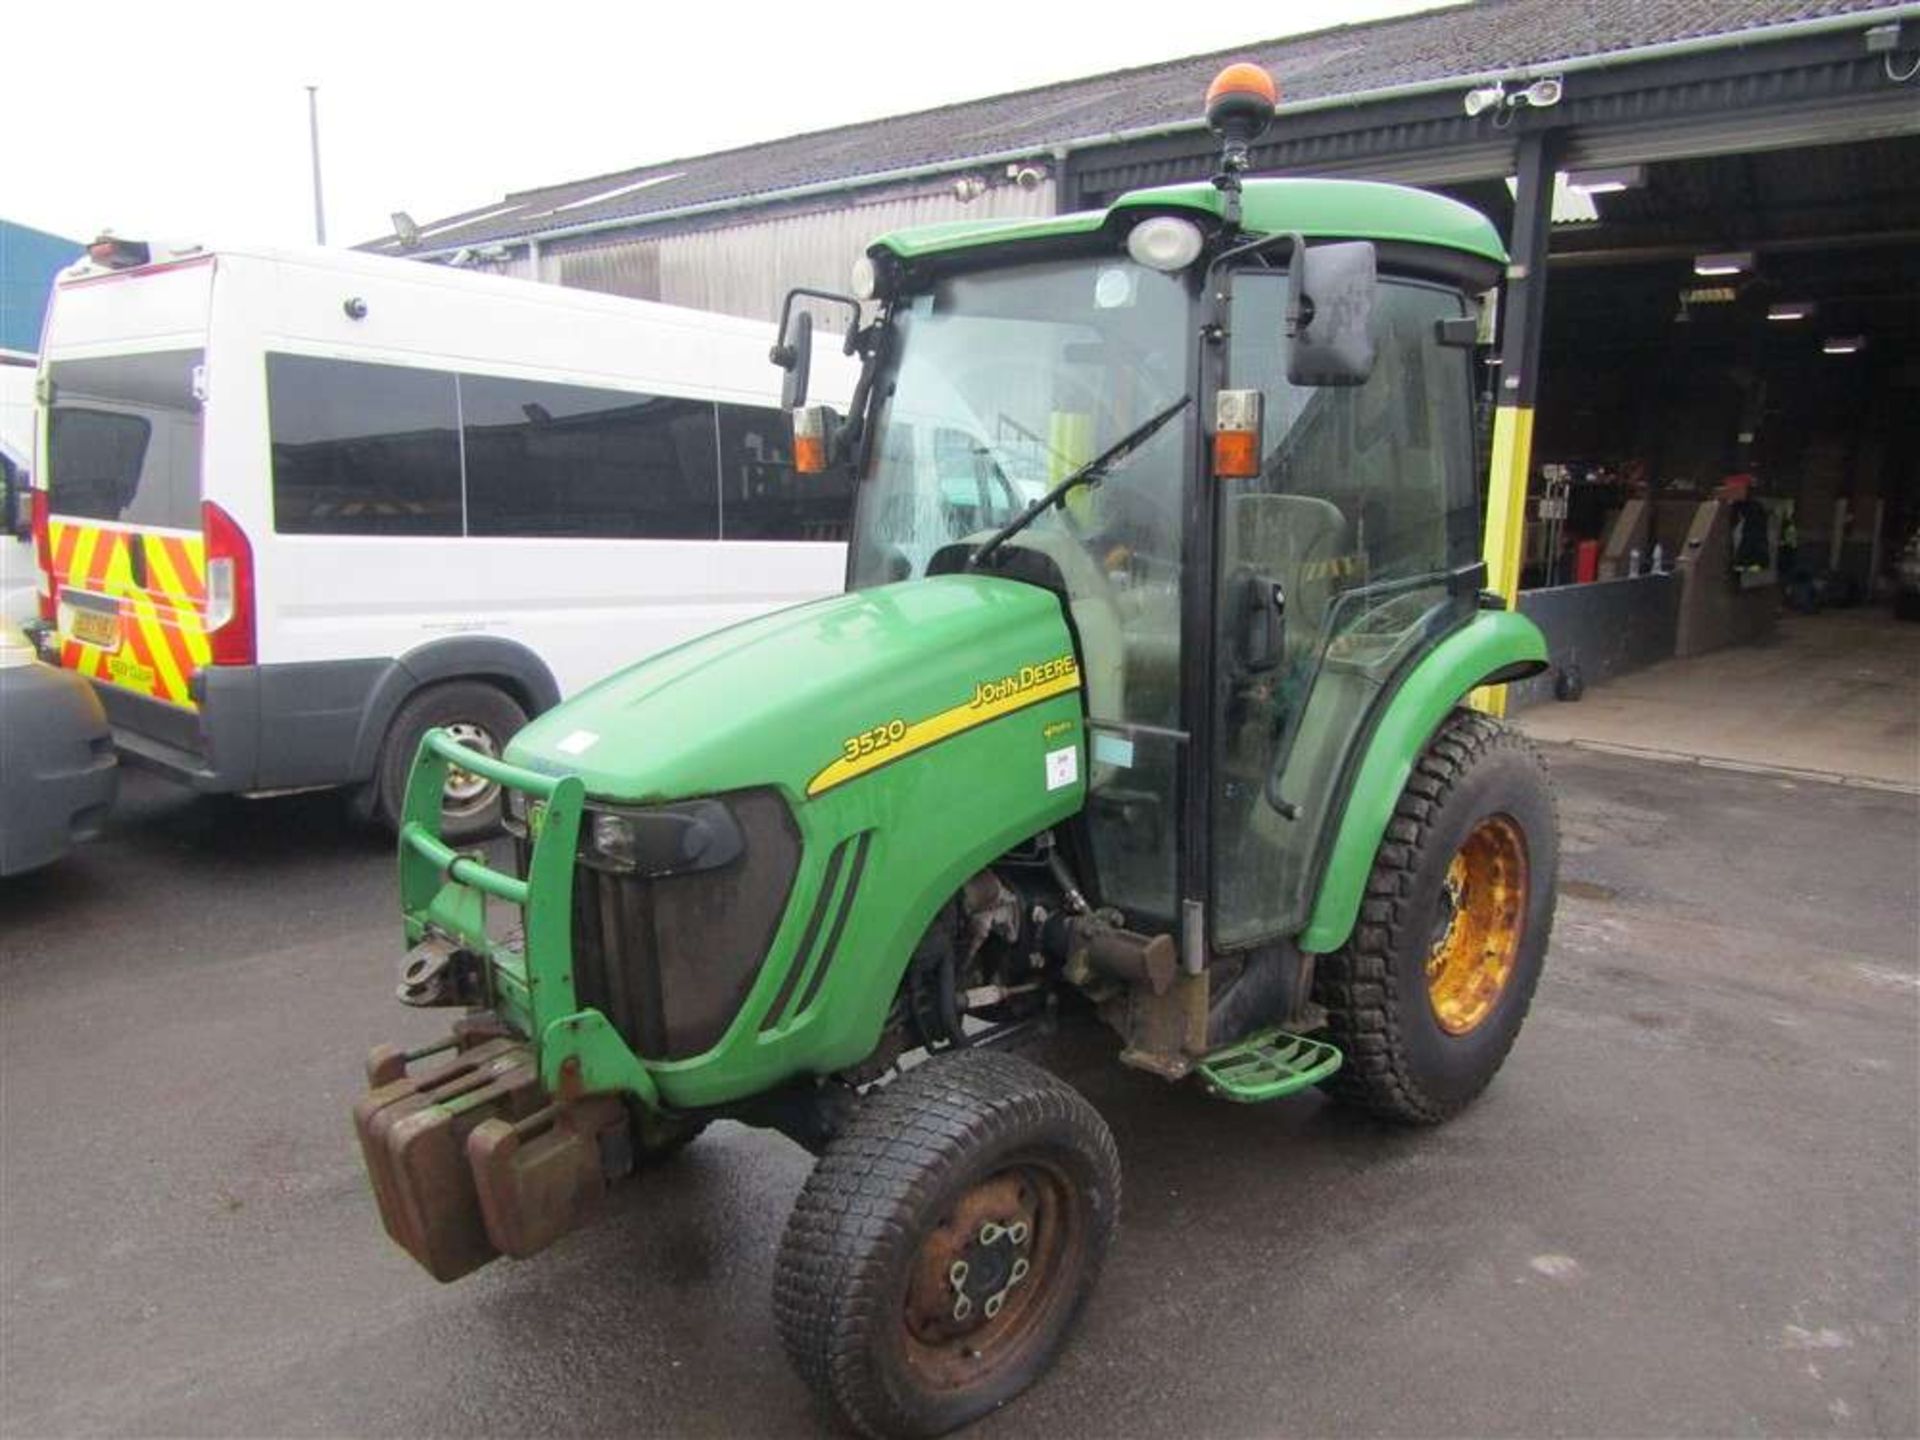 2008 57 reg John Deere 3520 Tractor C/W Loading Arm (Direct Council) - Image 2 of 8